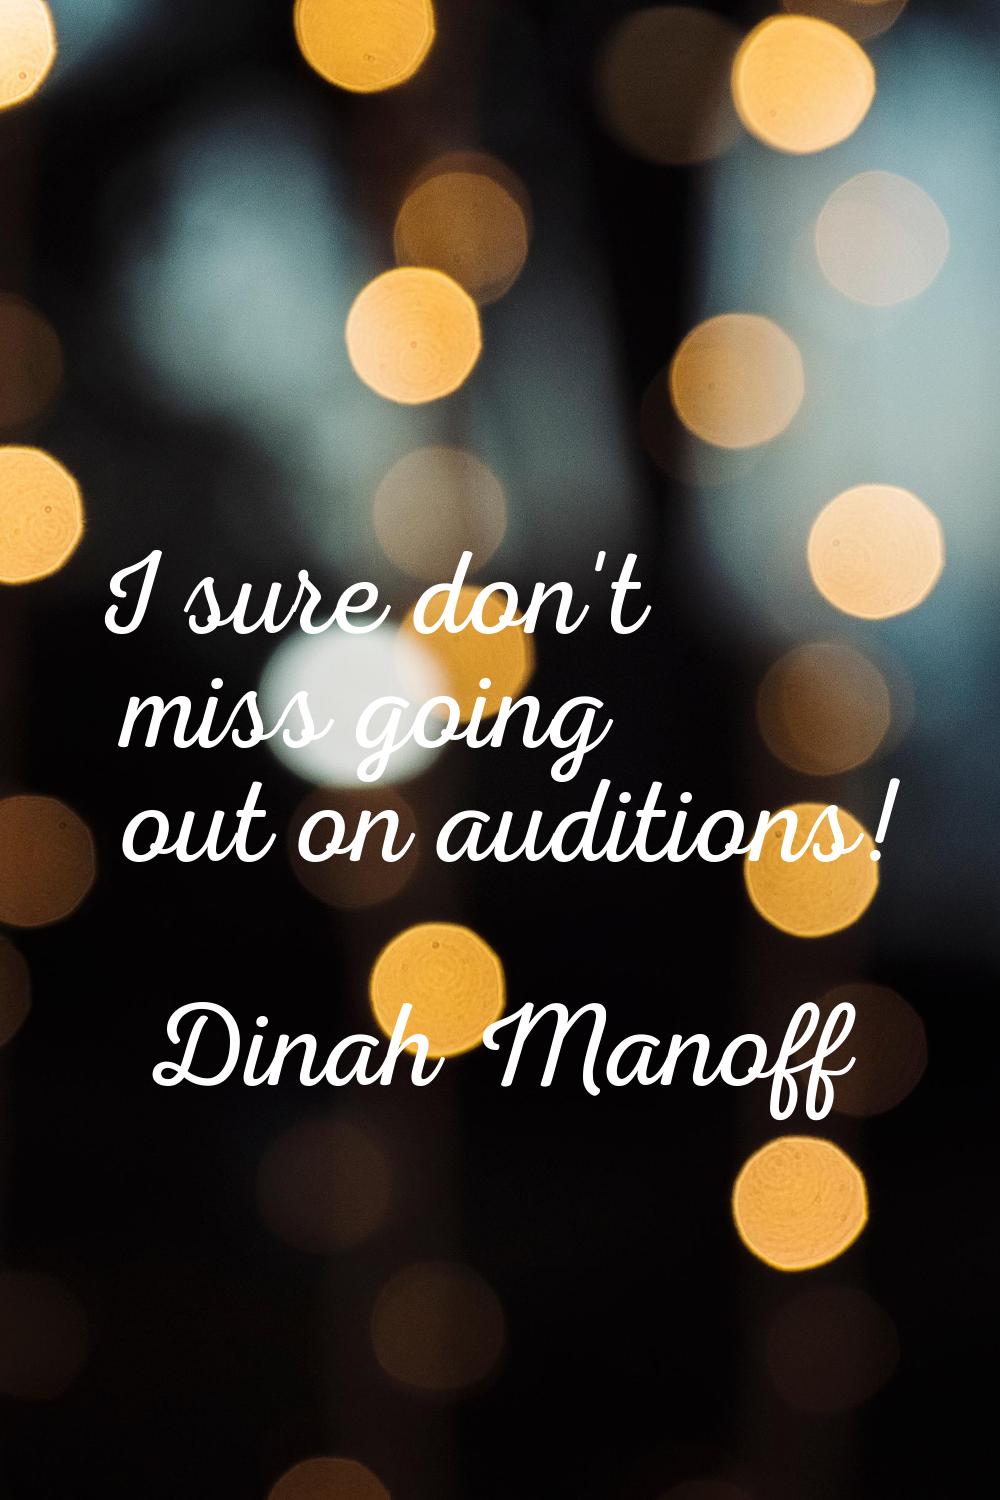 I sure don't miss going out on auditions!